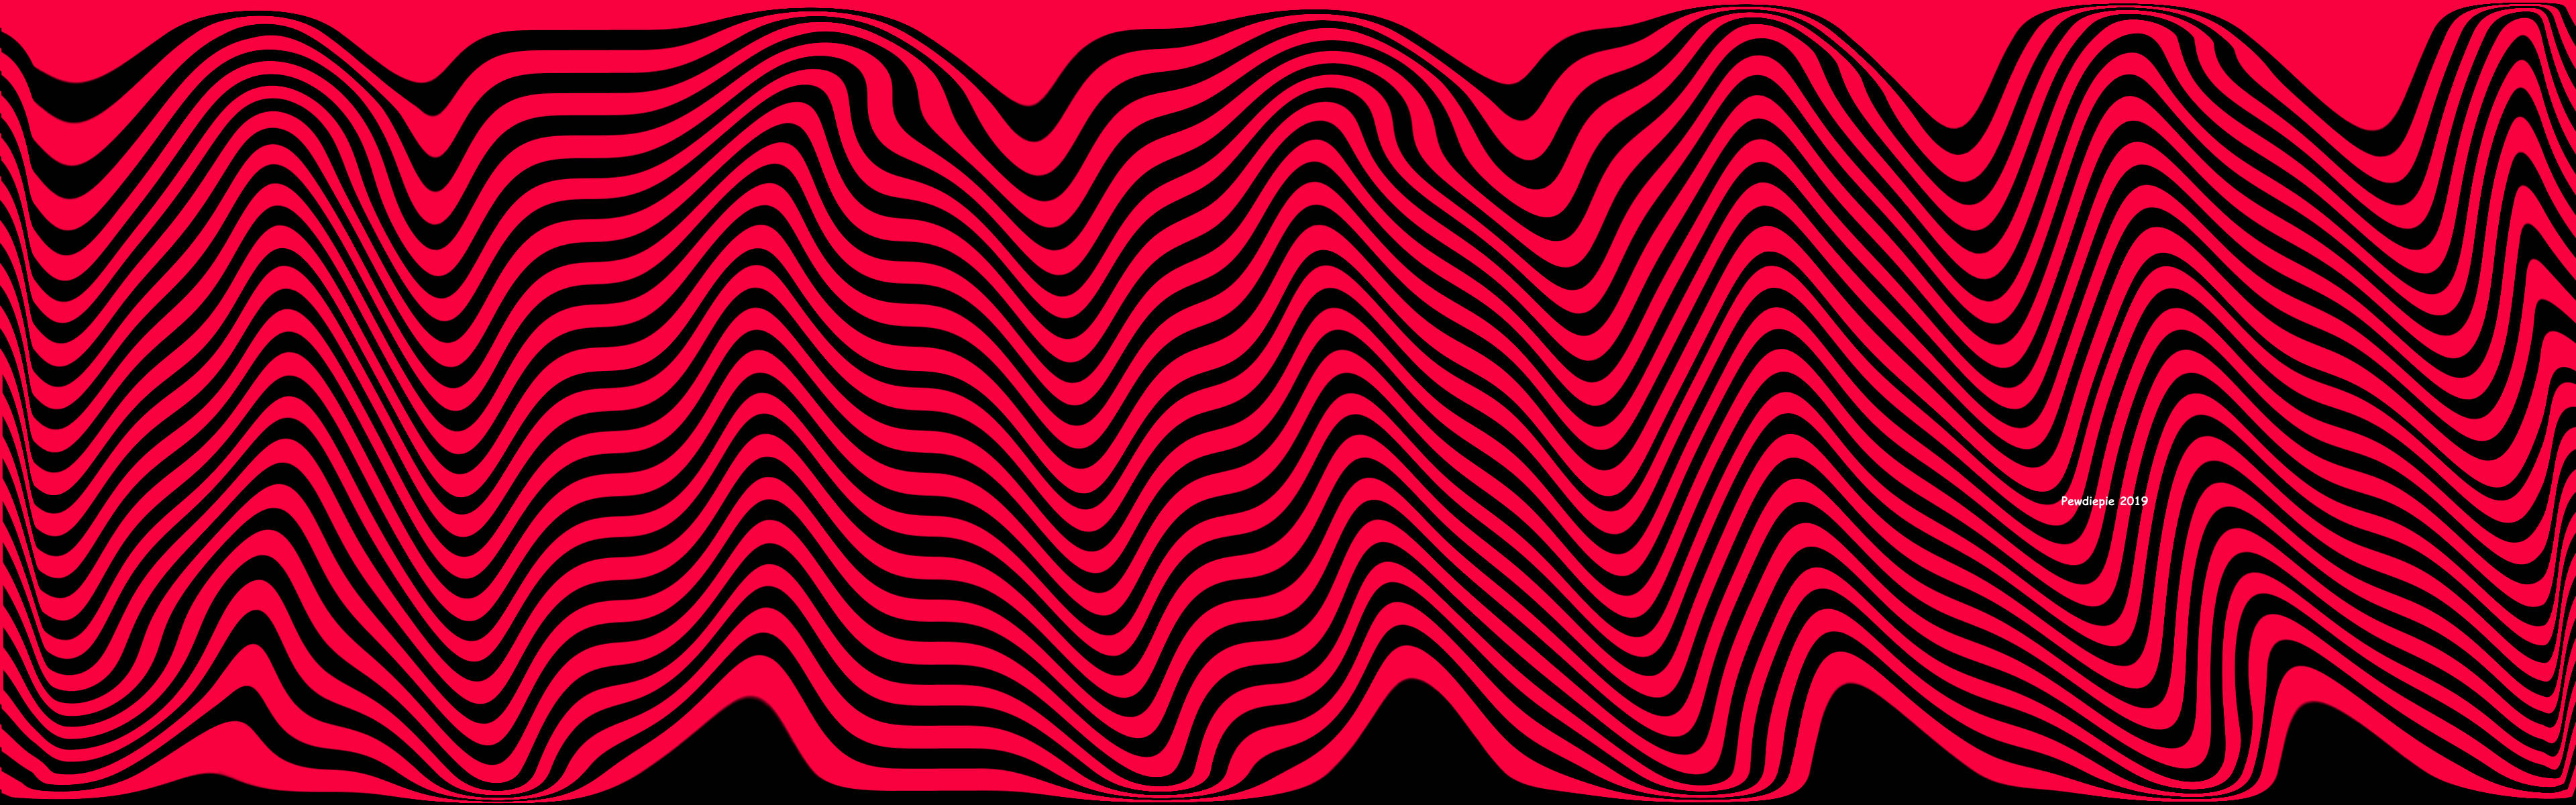 Pewdiepie's Unique Style On An Eye-catching Pink Background Background